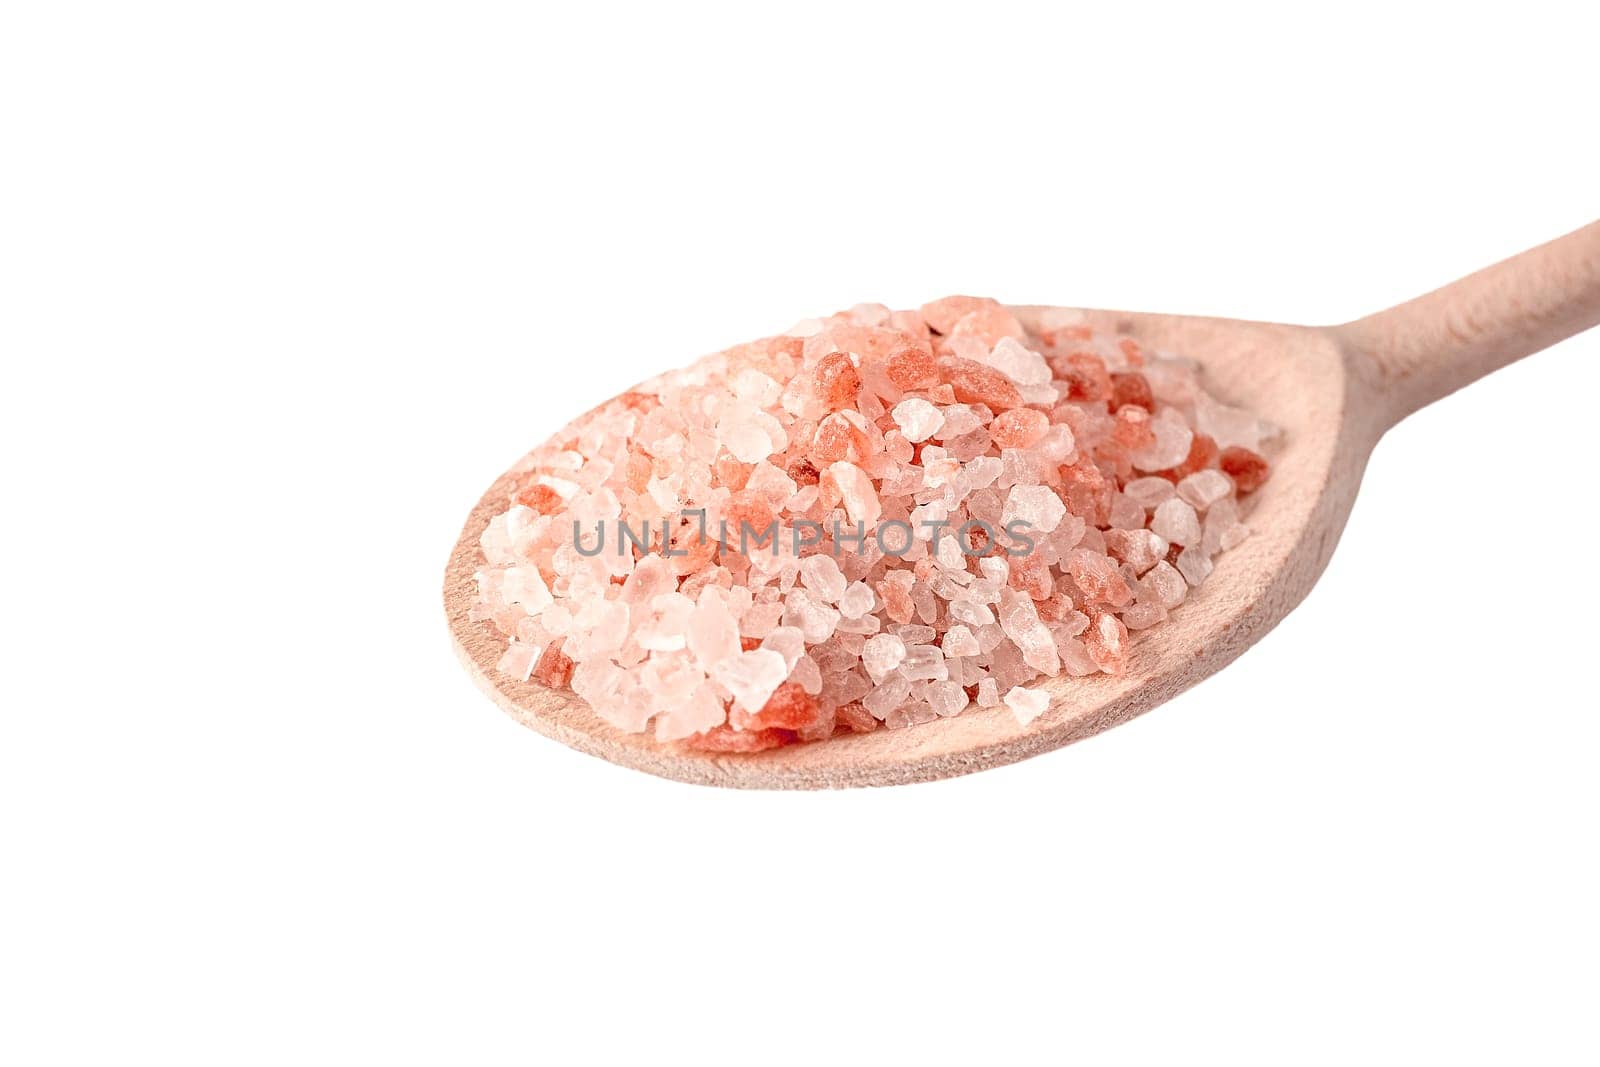 Pink Himalayan salt in wooden spoon isolated on white background.